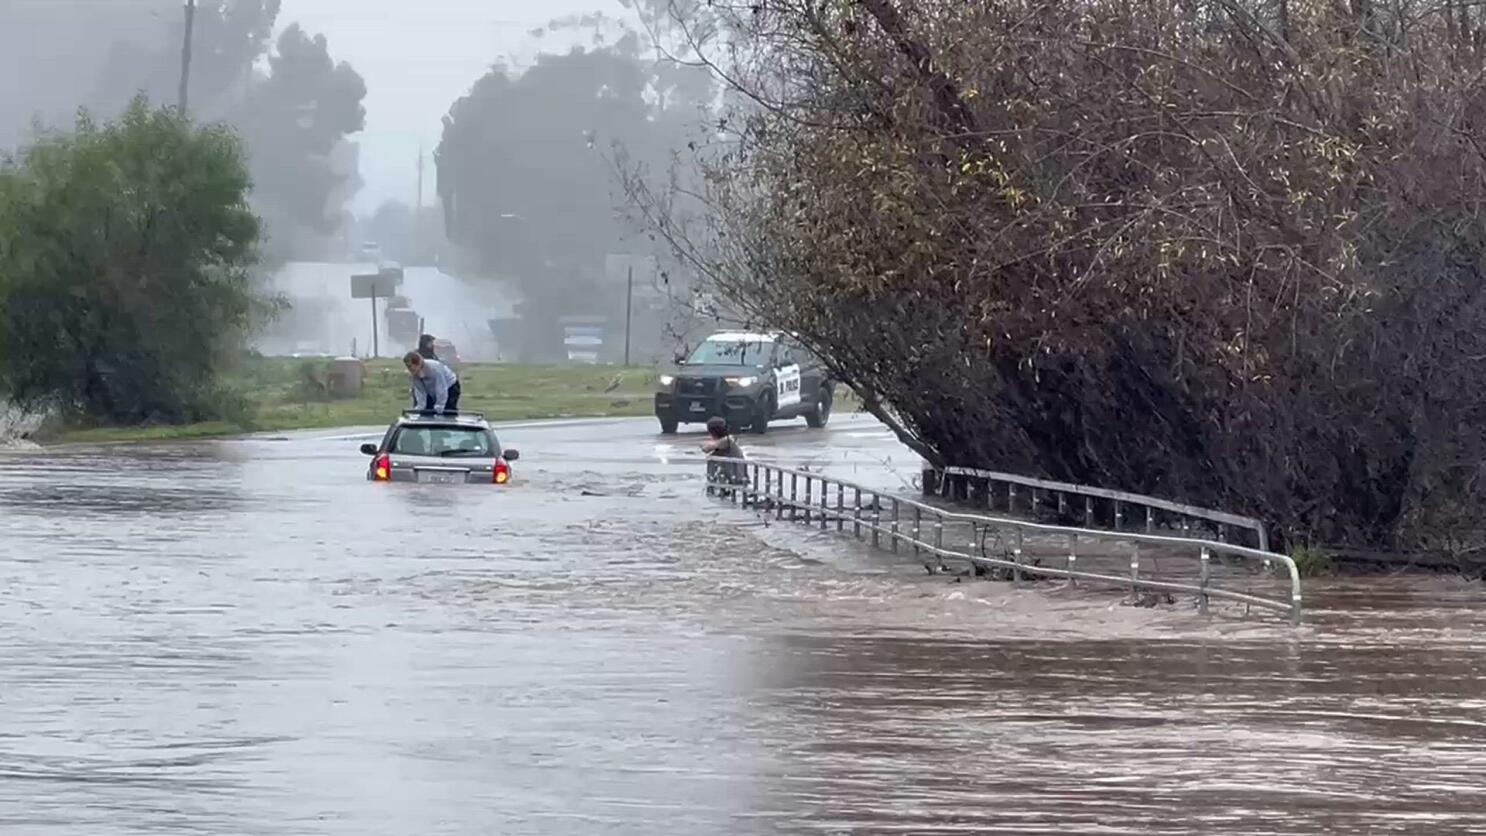 Widespread floods from rare rain event prompts rescues - The San